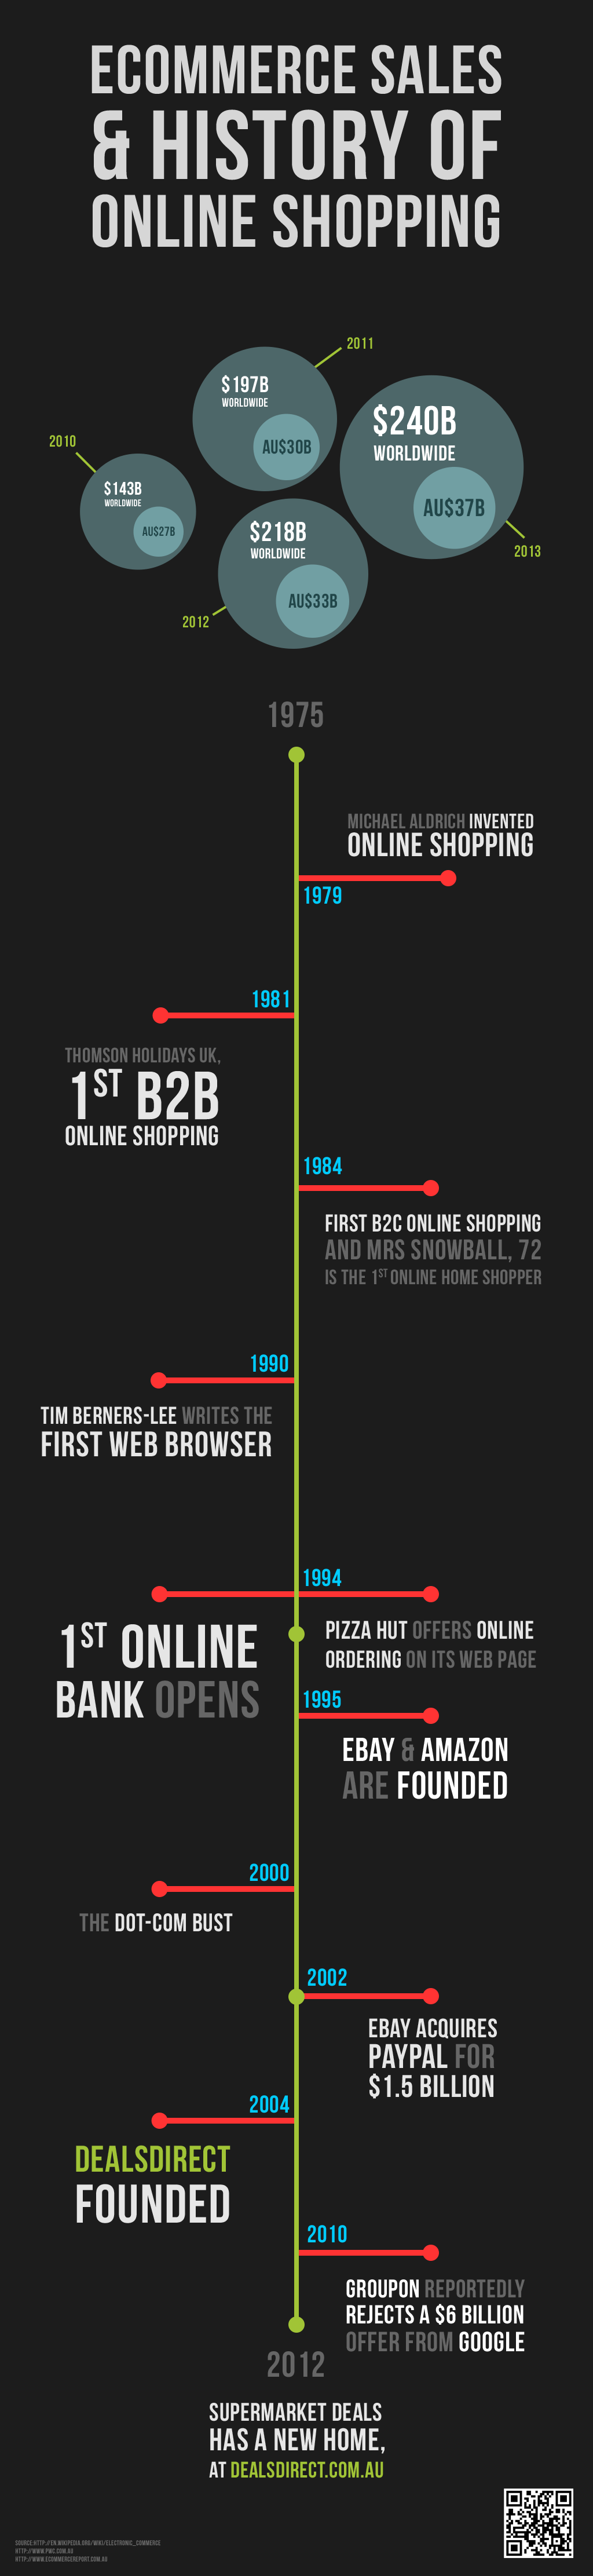 Ecommerce sales and history of online shopping Infographic